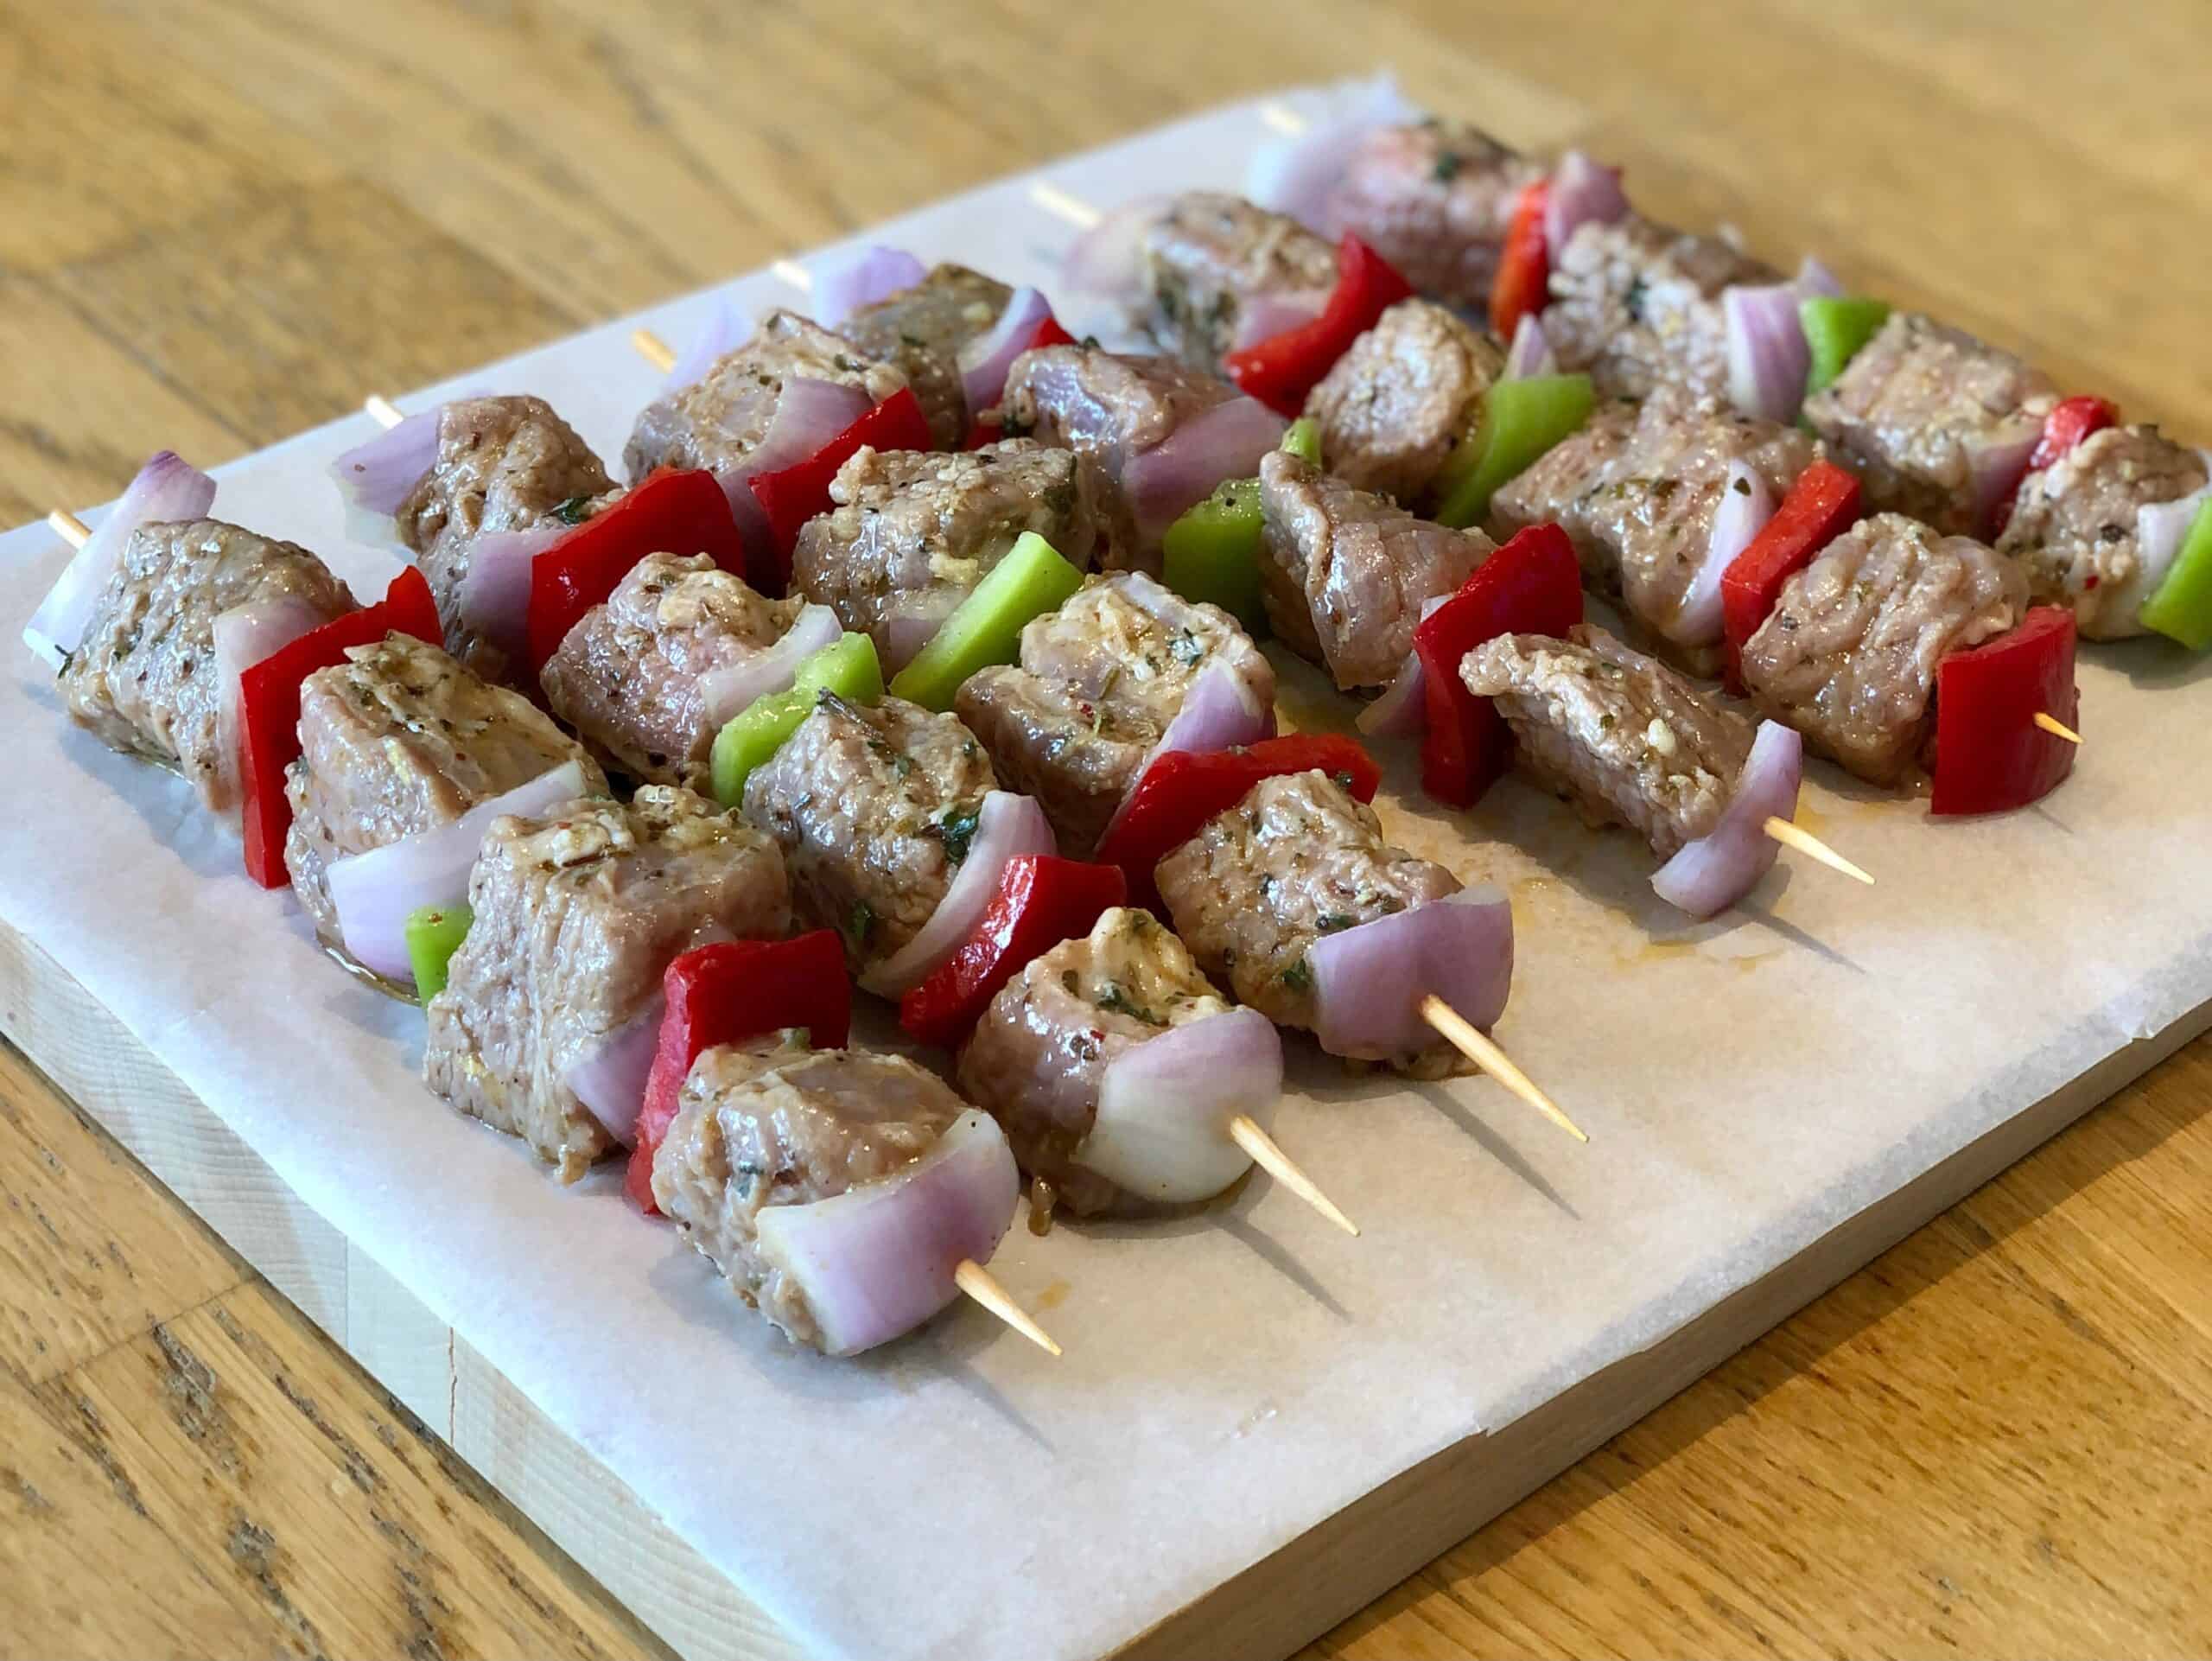 Marinated Greek Beef Souvlaki Skewers (Beef Kabobs) ready to grill